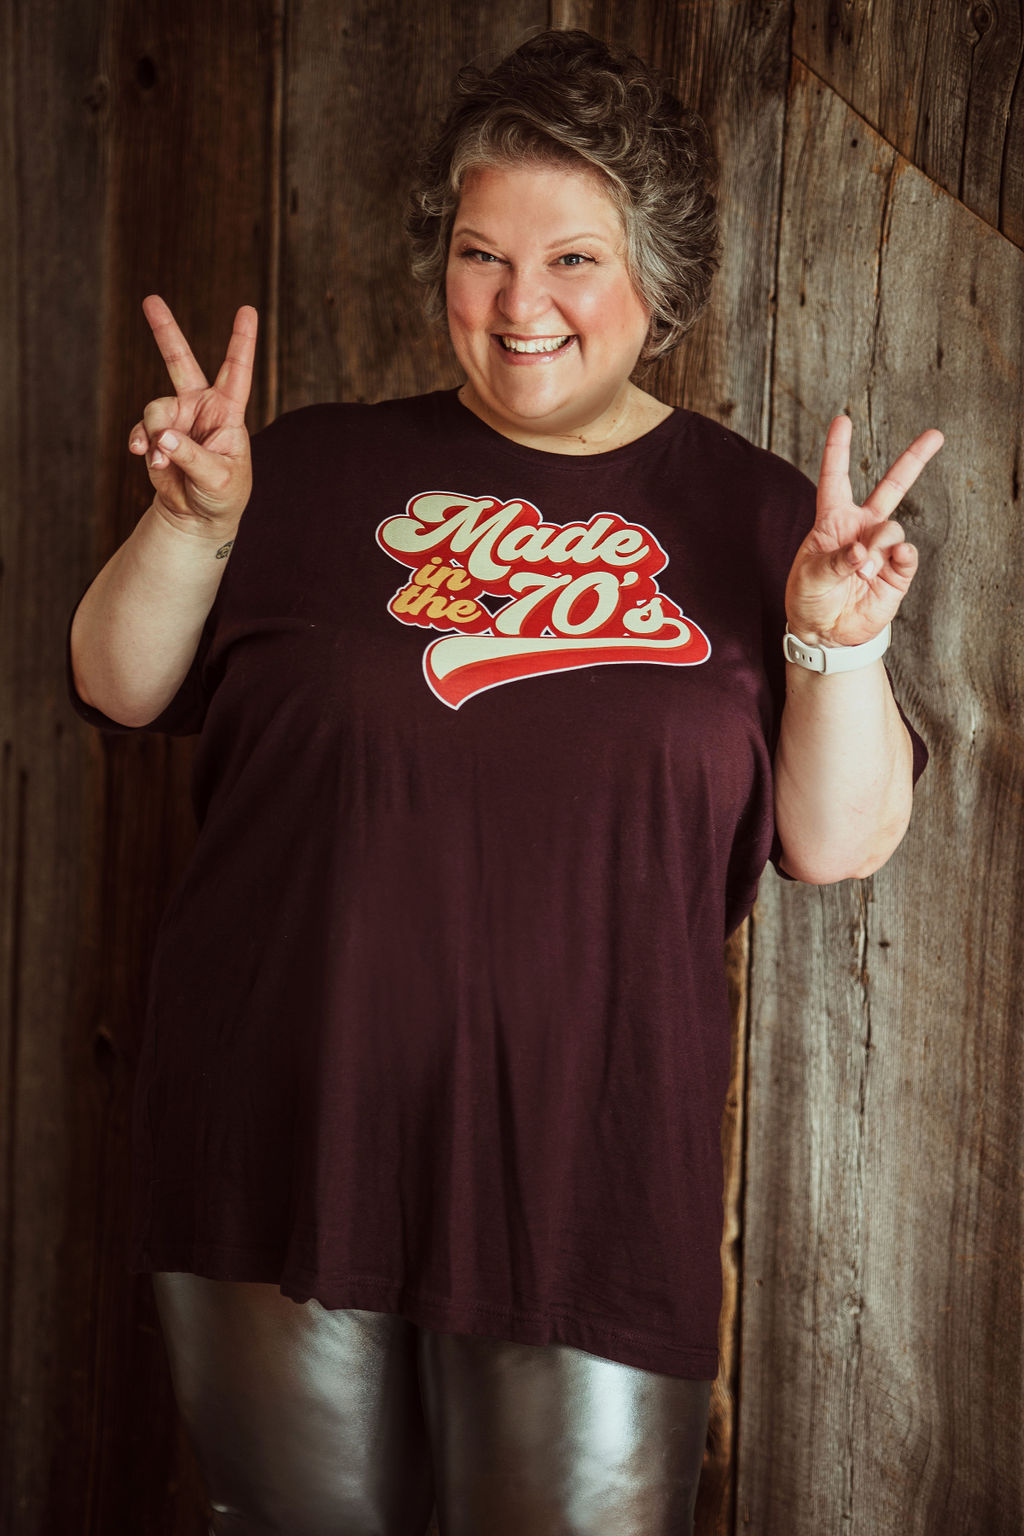 A woman giving the peace sign with "Made in the 70s" on her purple t shit, she is also wearing silver tights. She is celebrating her life.